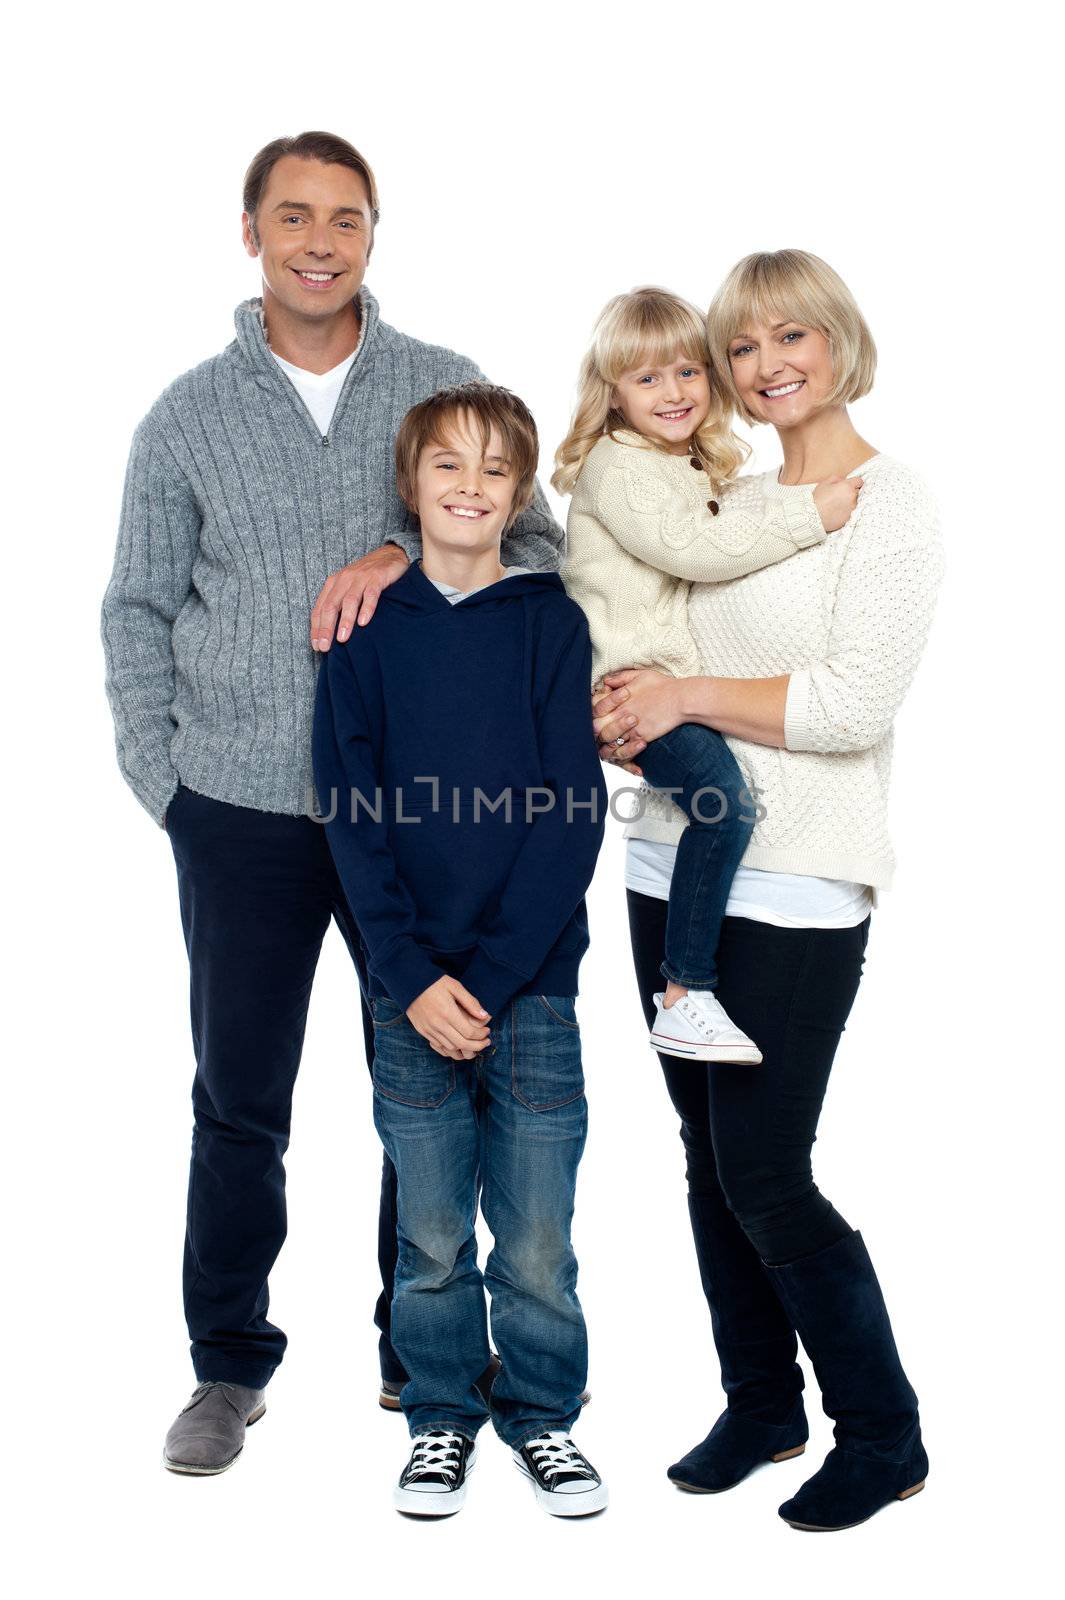 Full length portrait of a happy family posing in trendy winter wear outfits.